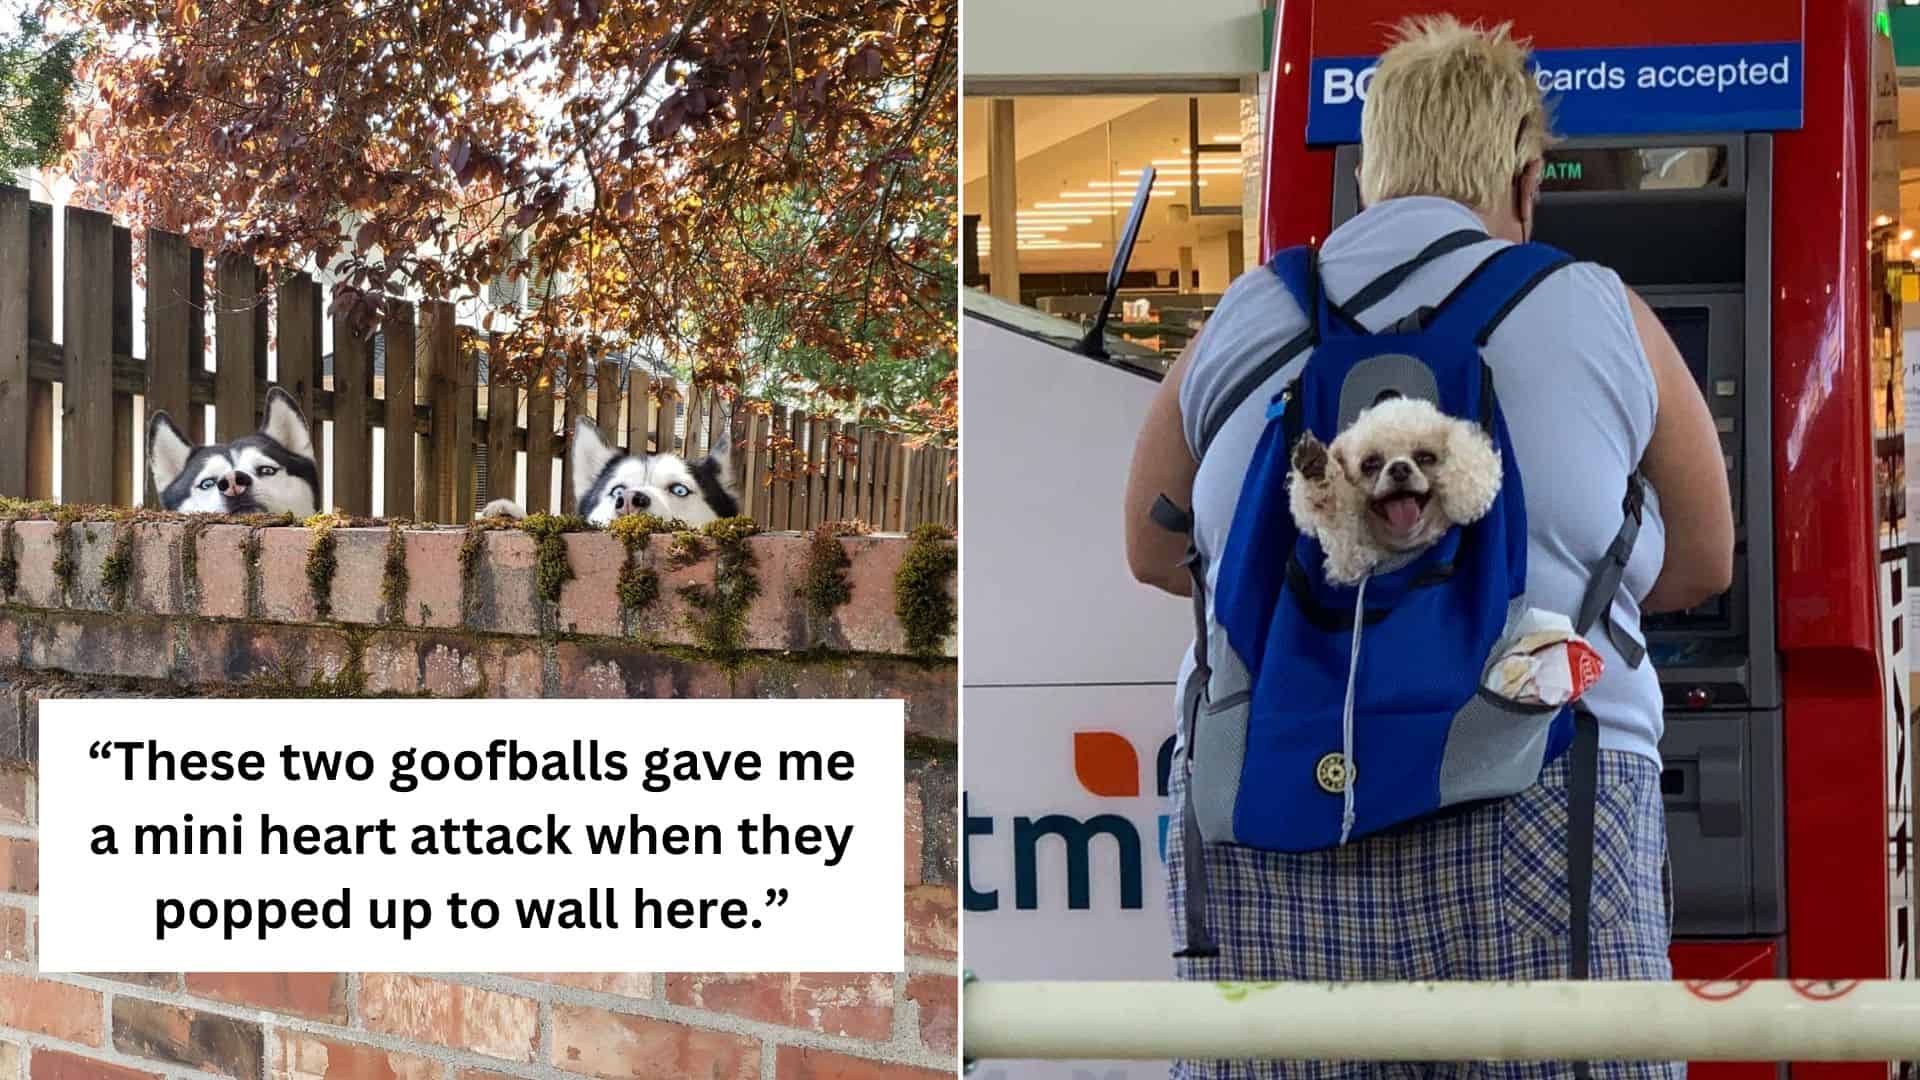 23 Pics Of The Best Unexpected Dog Encounters From The ‘Dogspotting’ Facebook Group